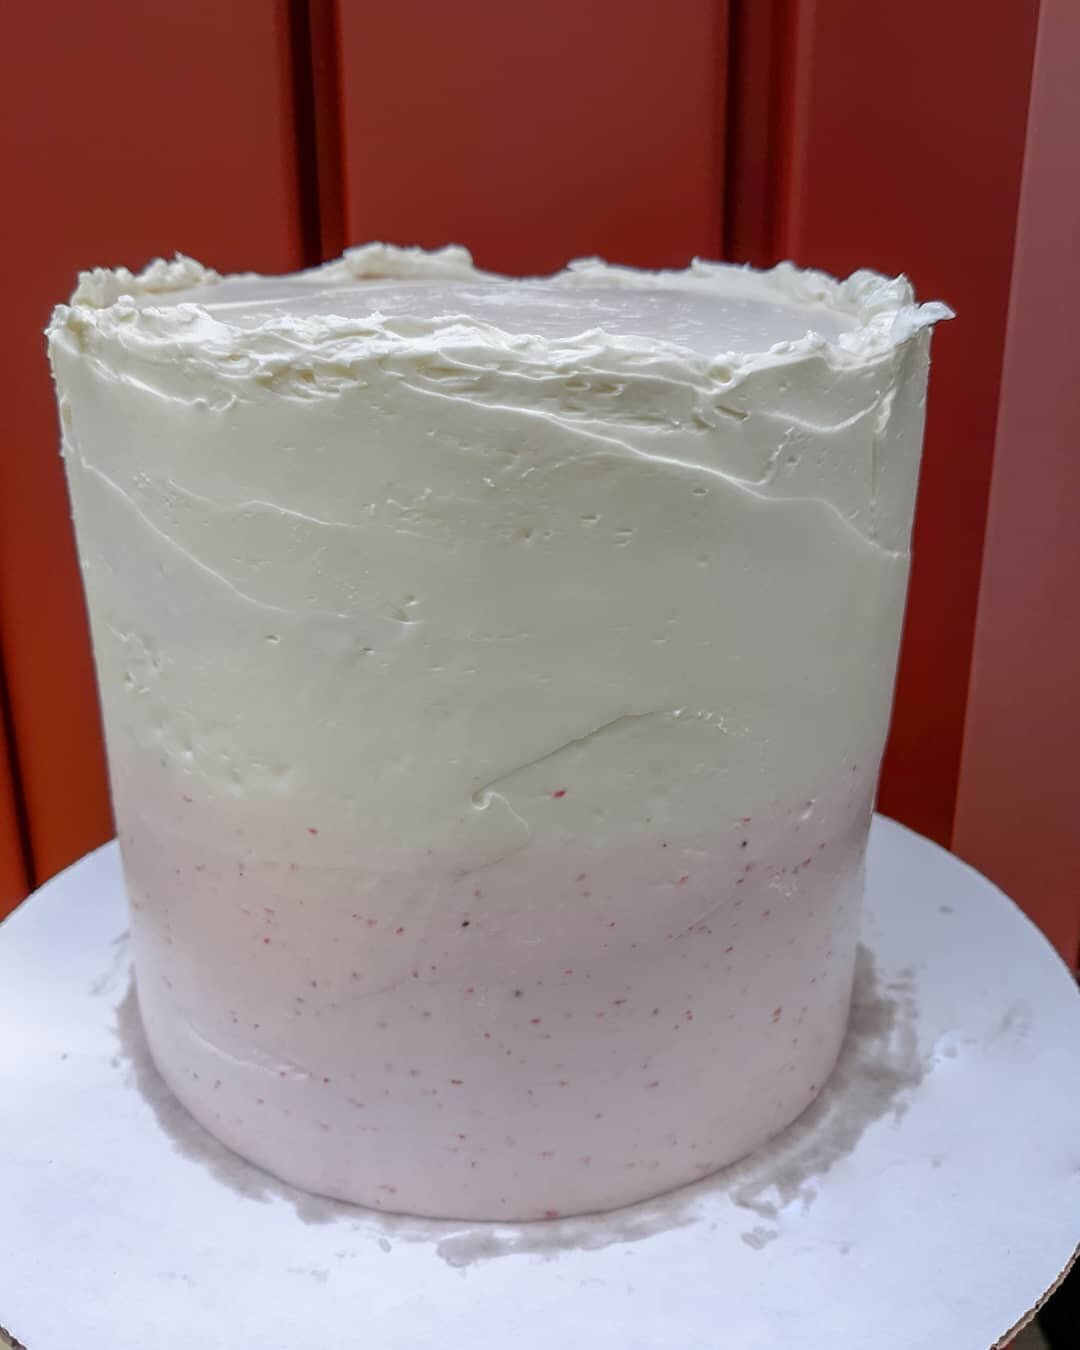 I love working with clients to make their perfect cake, and this one was really fun.
A neapolitan cake with strawberry buttercream and blueberry jam filling. 
Swipe to see those layers!